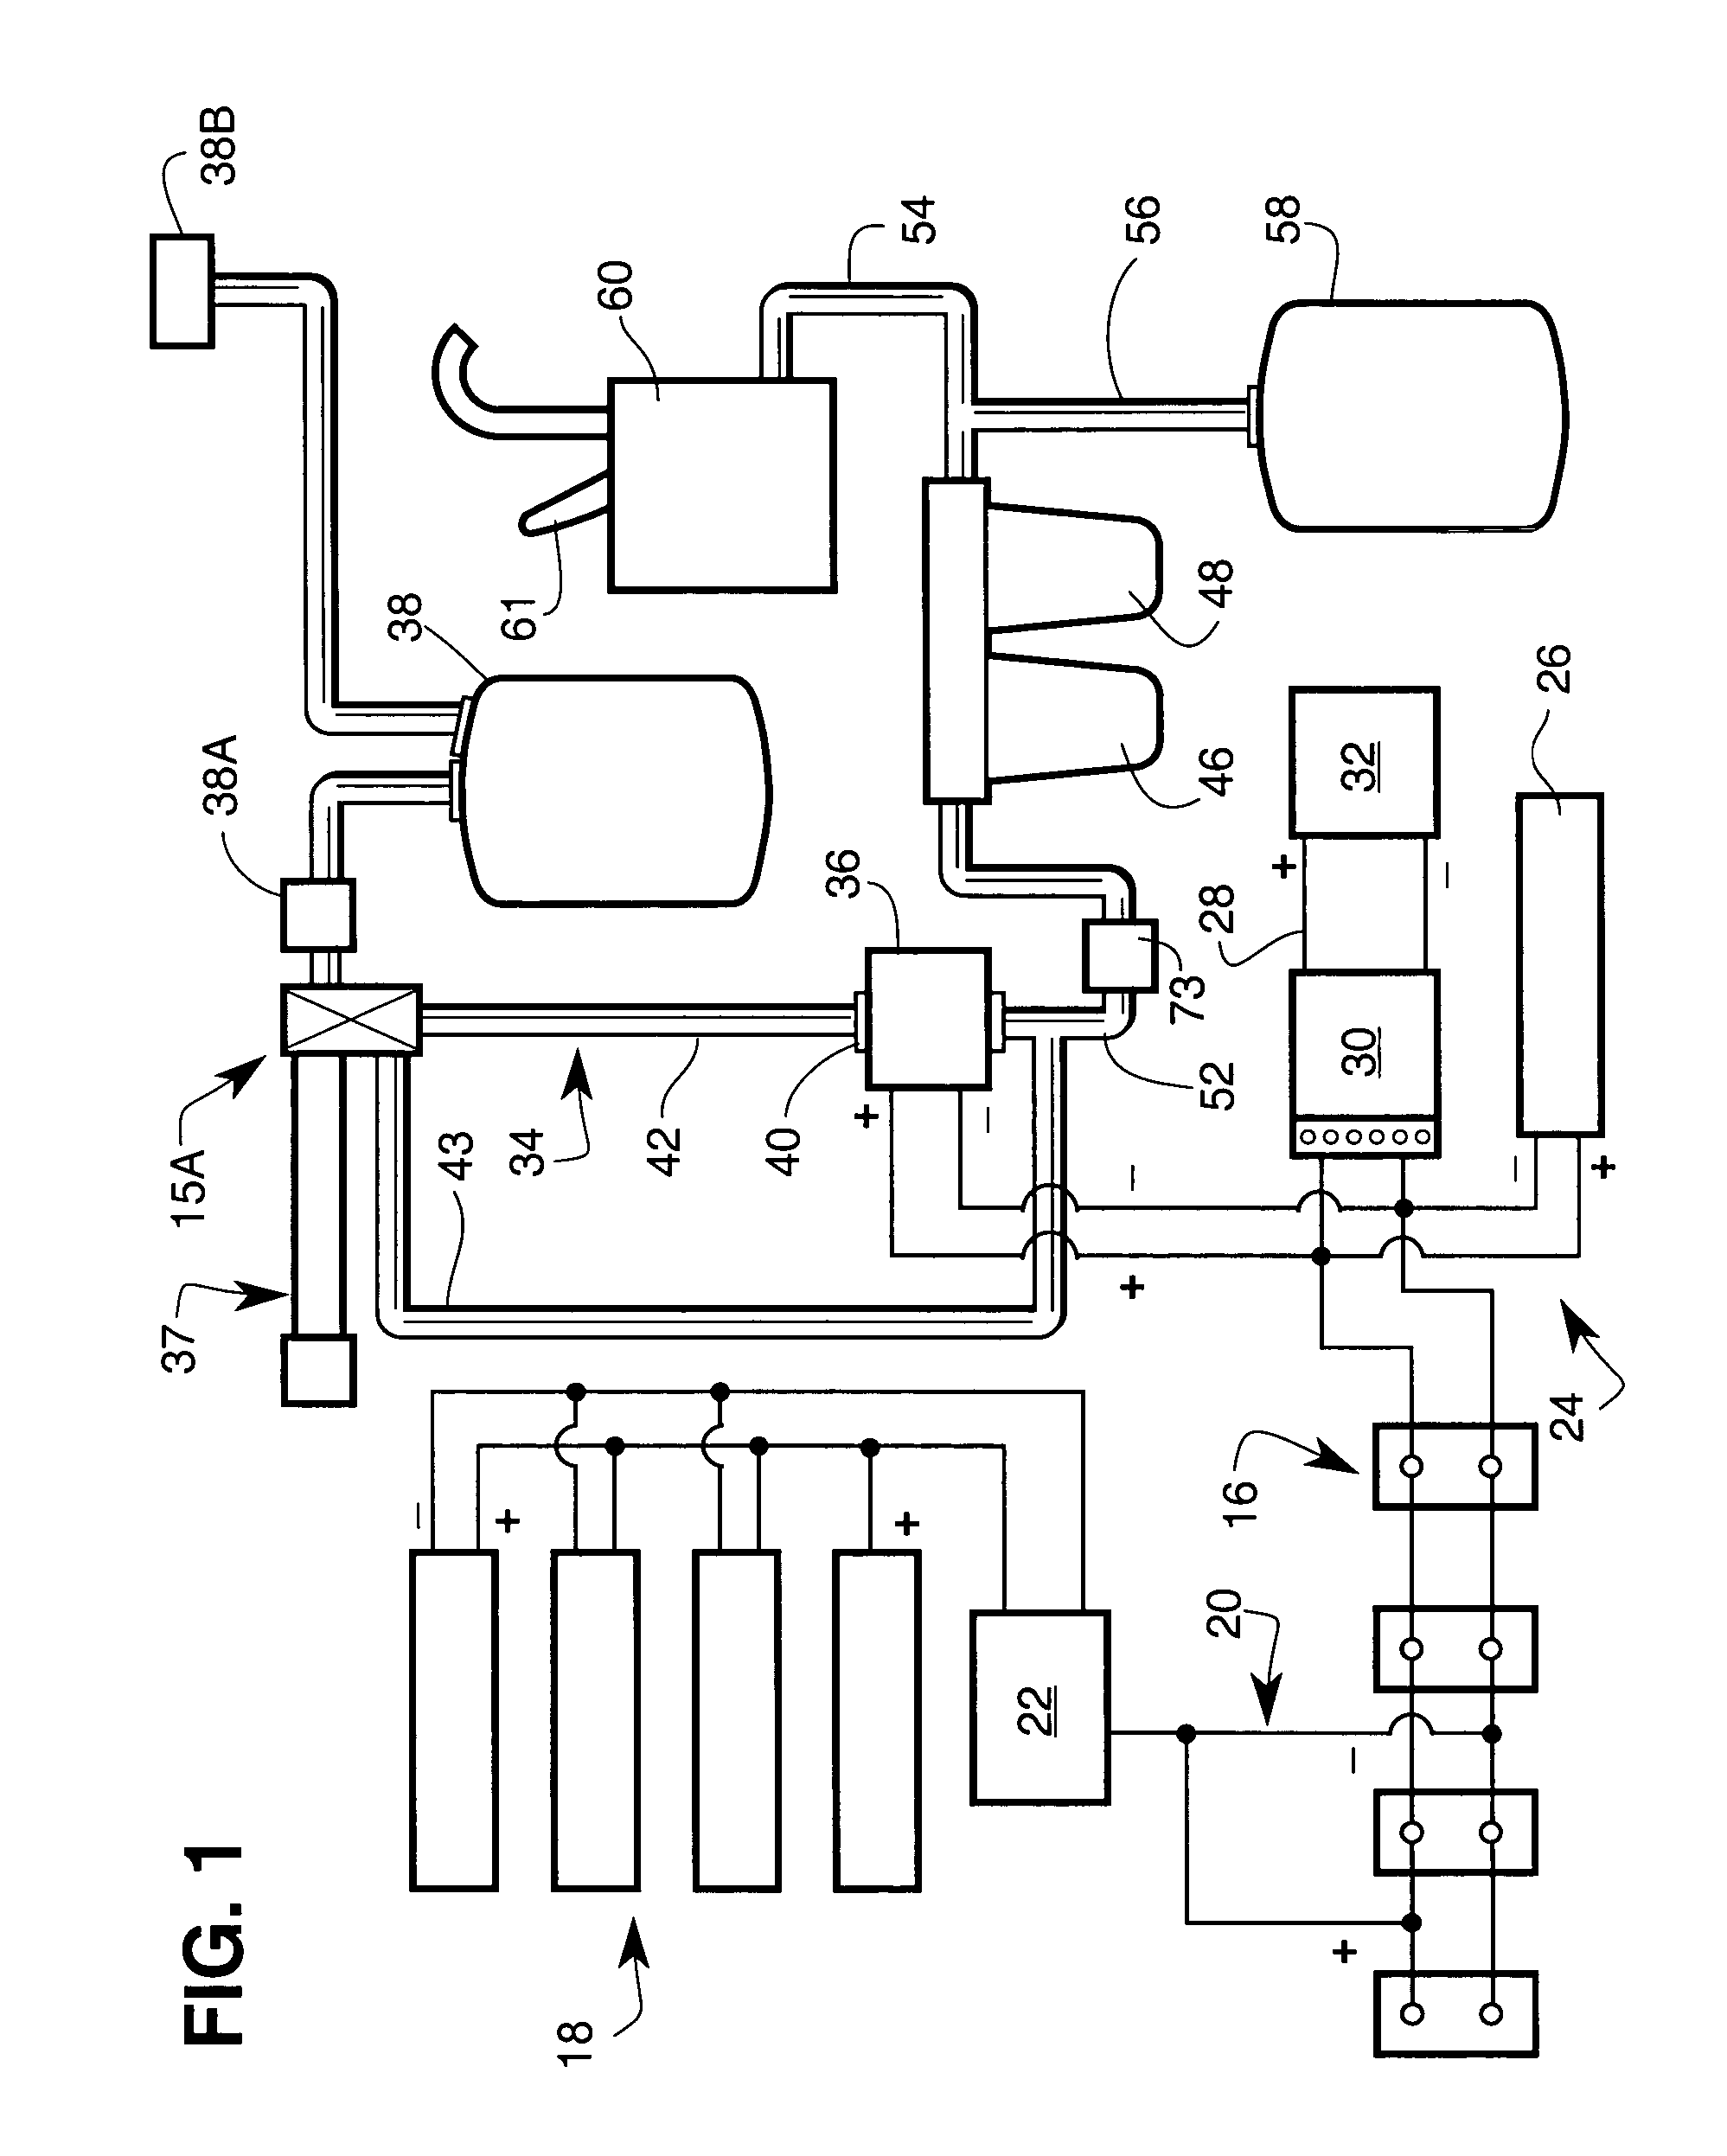 Renewable portable stored energy power generating apparatus with alternate water source capability